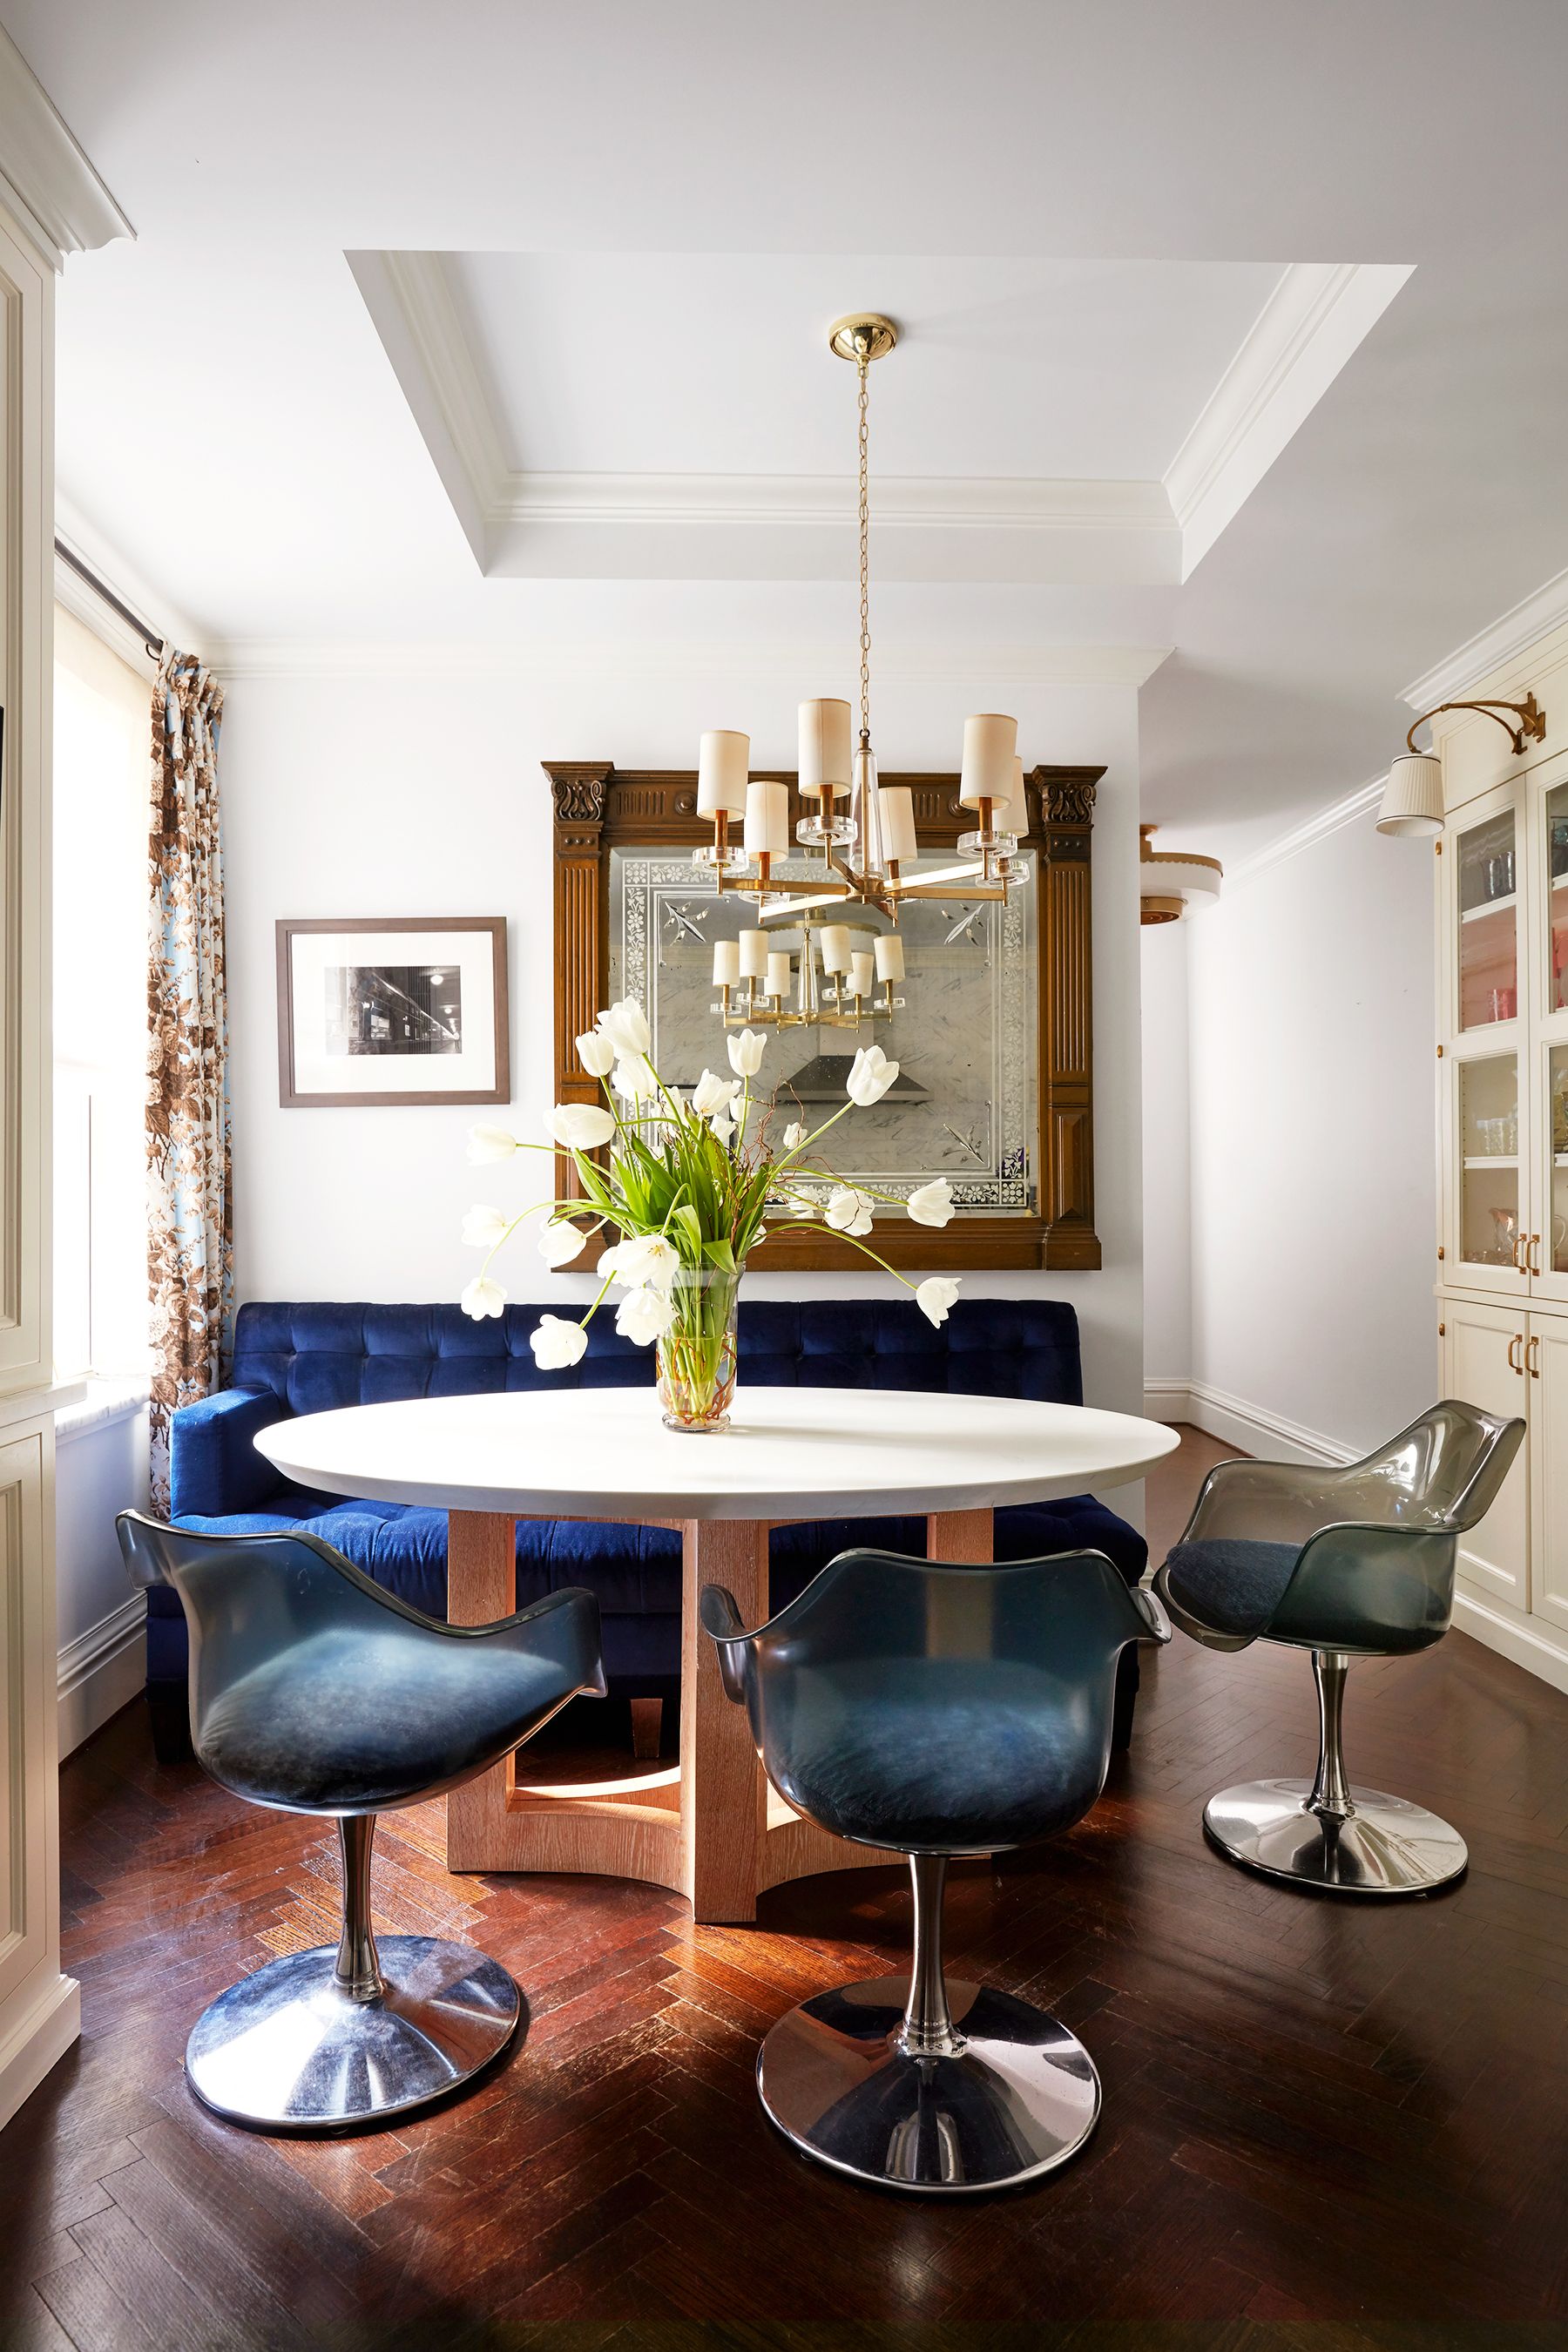 30 Small Dining Room Ideas to Make the Most of Your Space